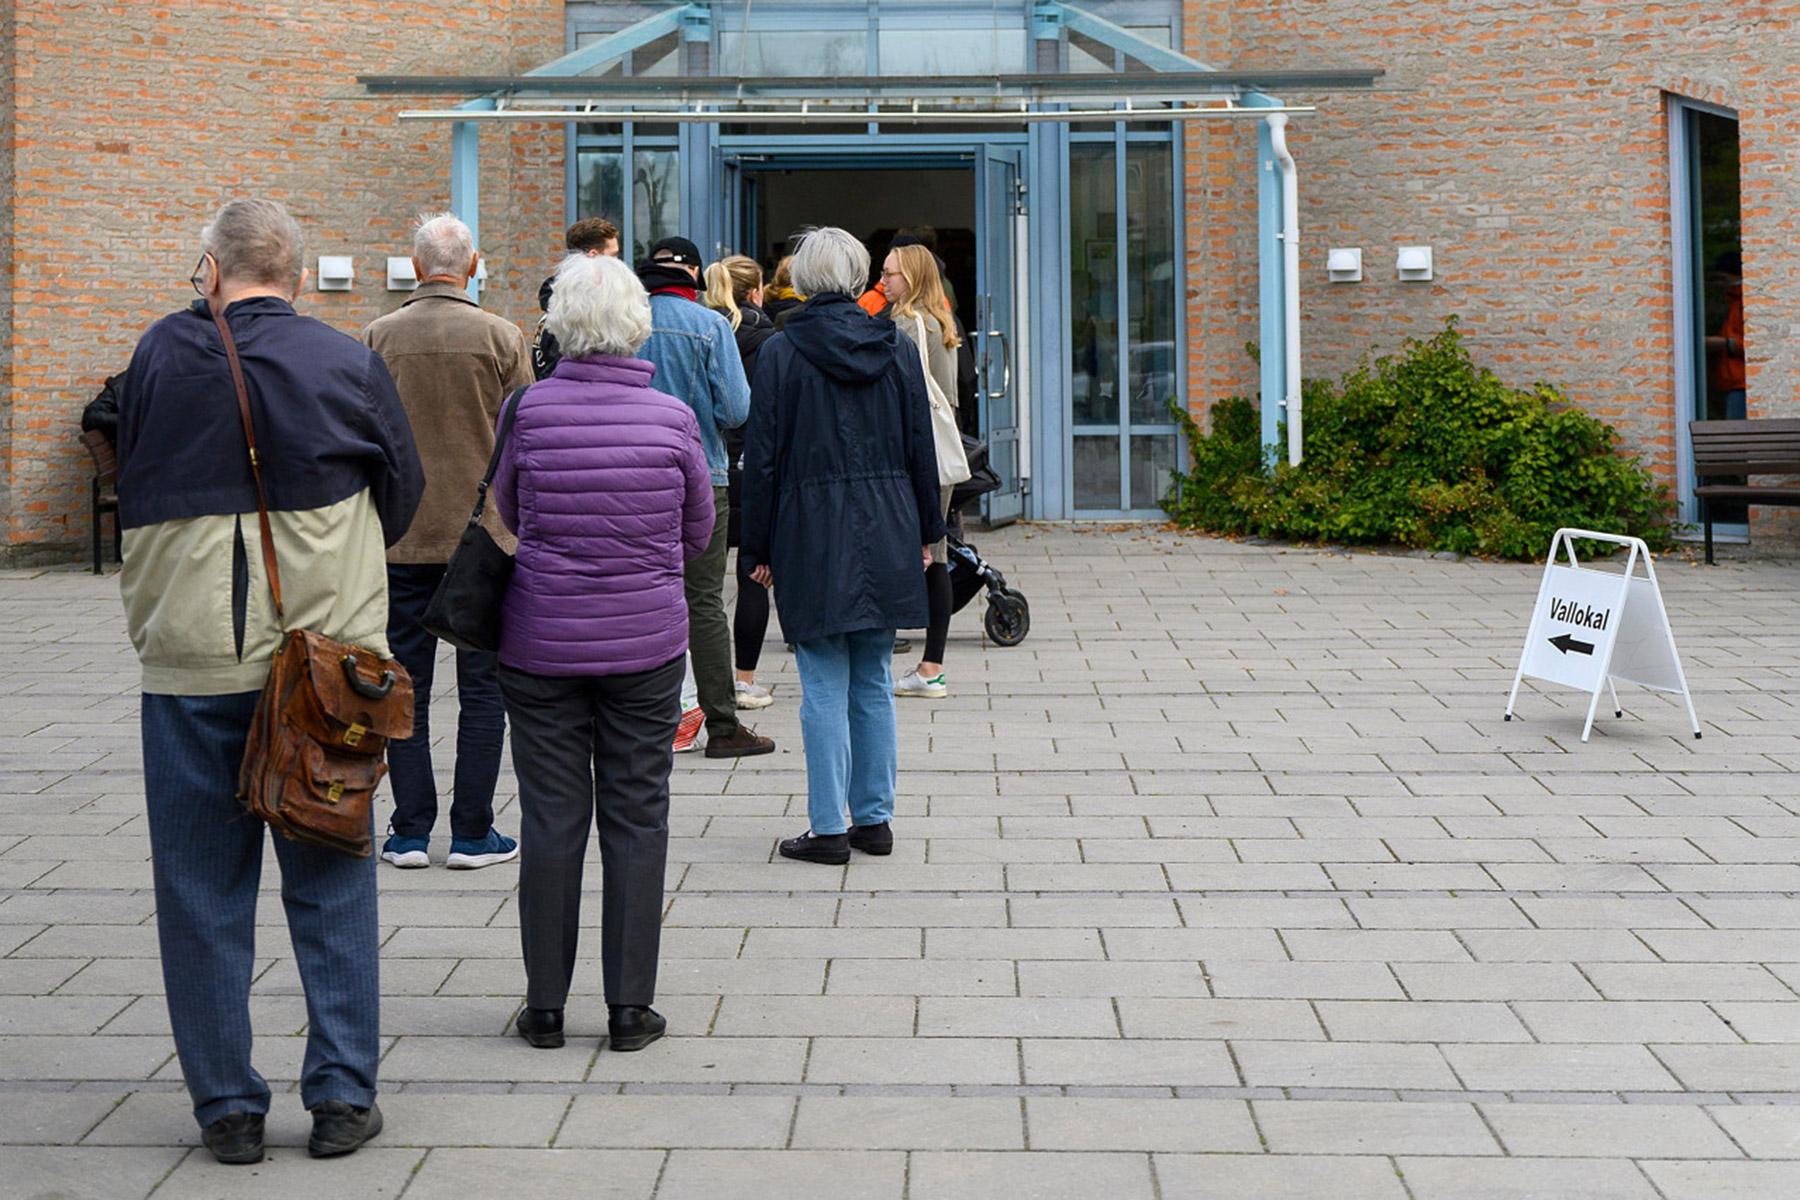 People queuing outside St. Pers Church in Uppsala, Sweden, to cast their vote in the church elections. Photo: Magnus Aronson/Ikon